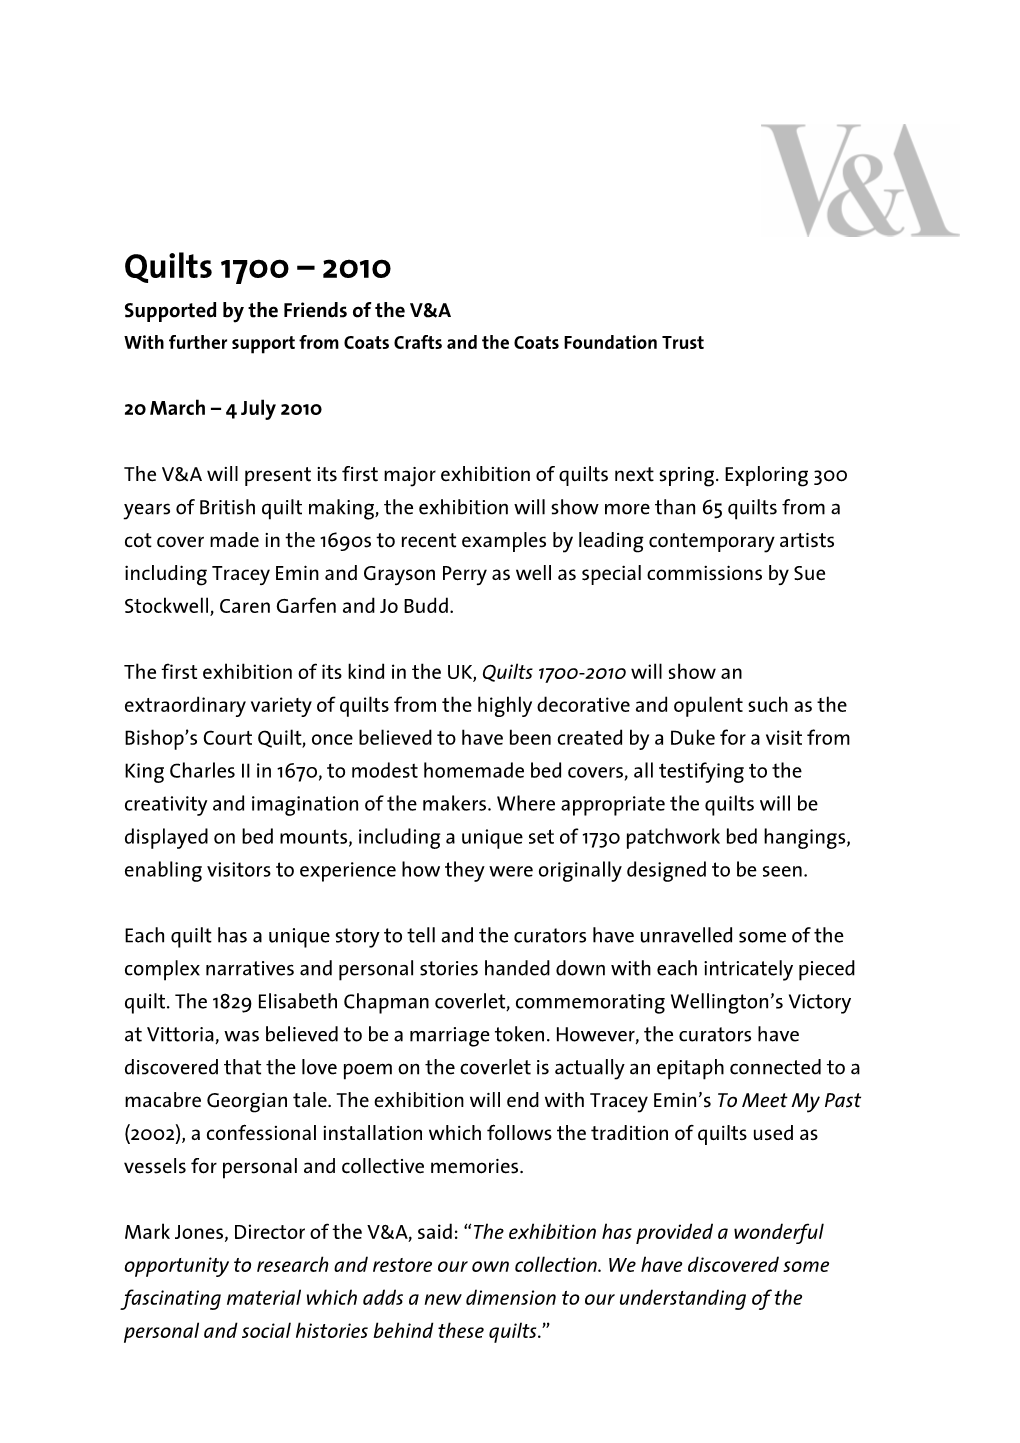 Finalquilts Press Release